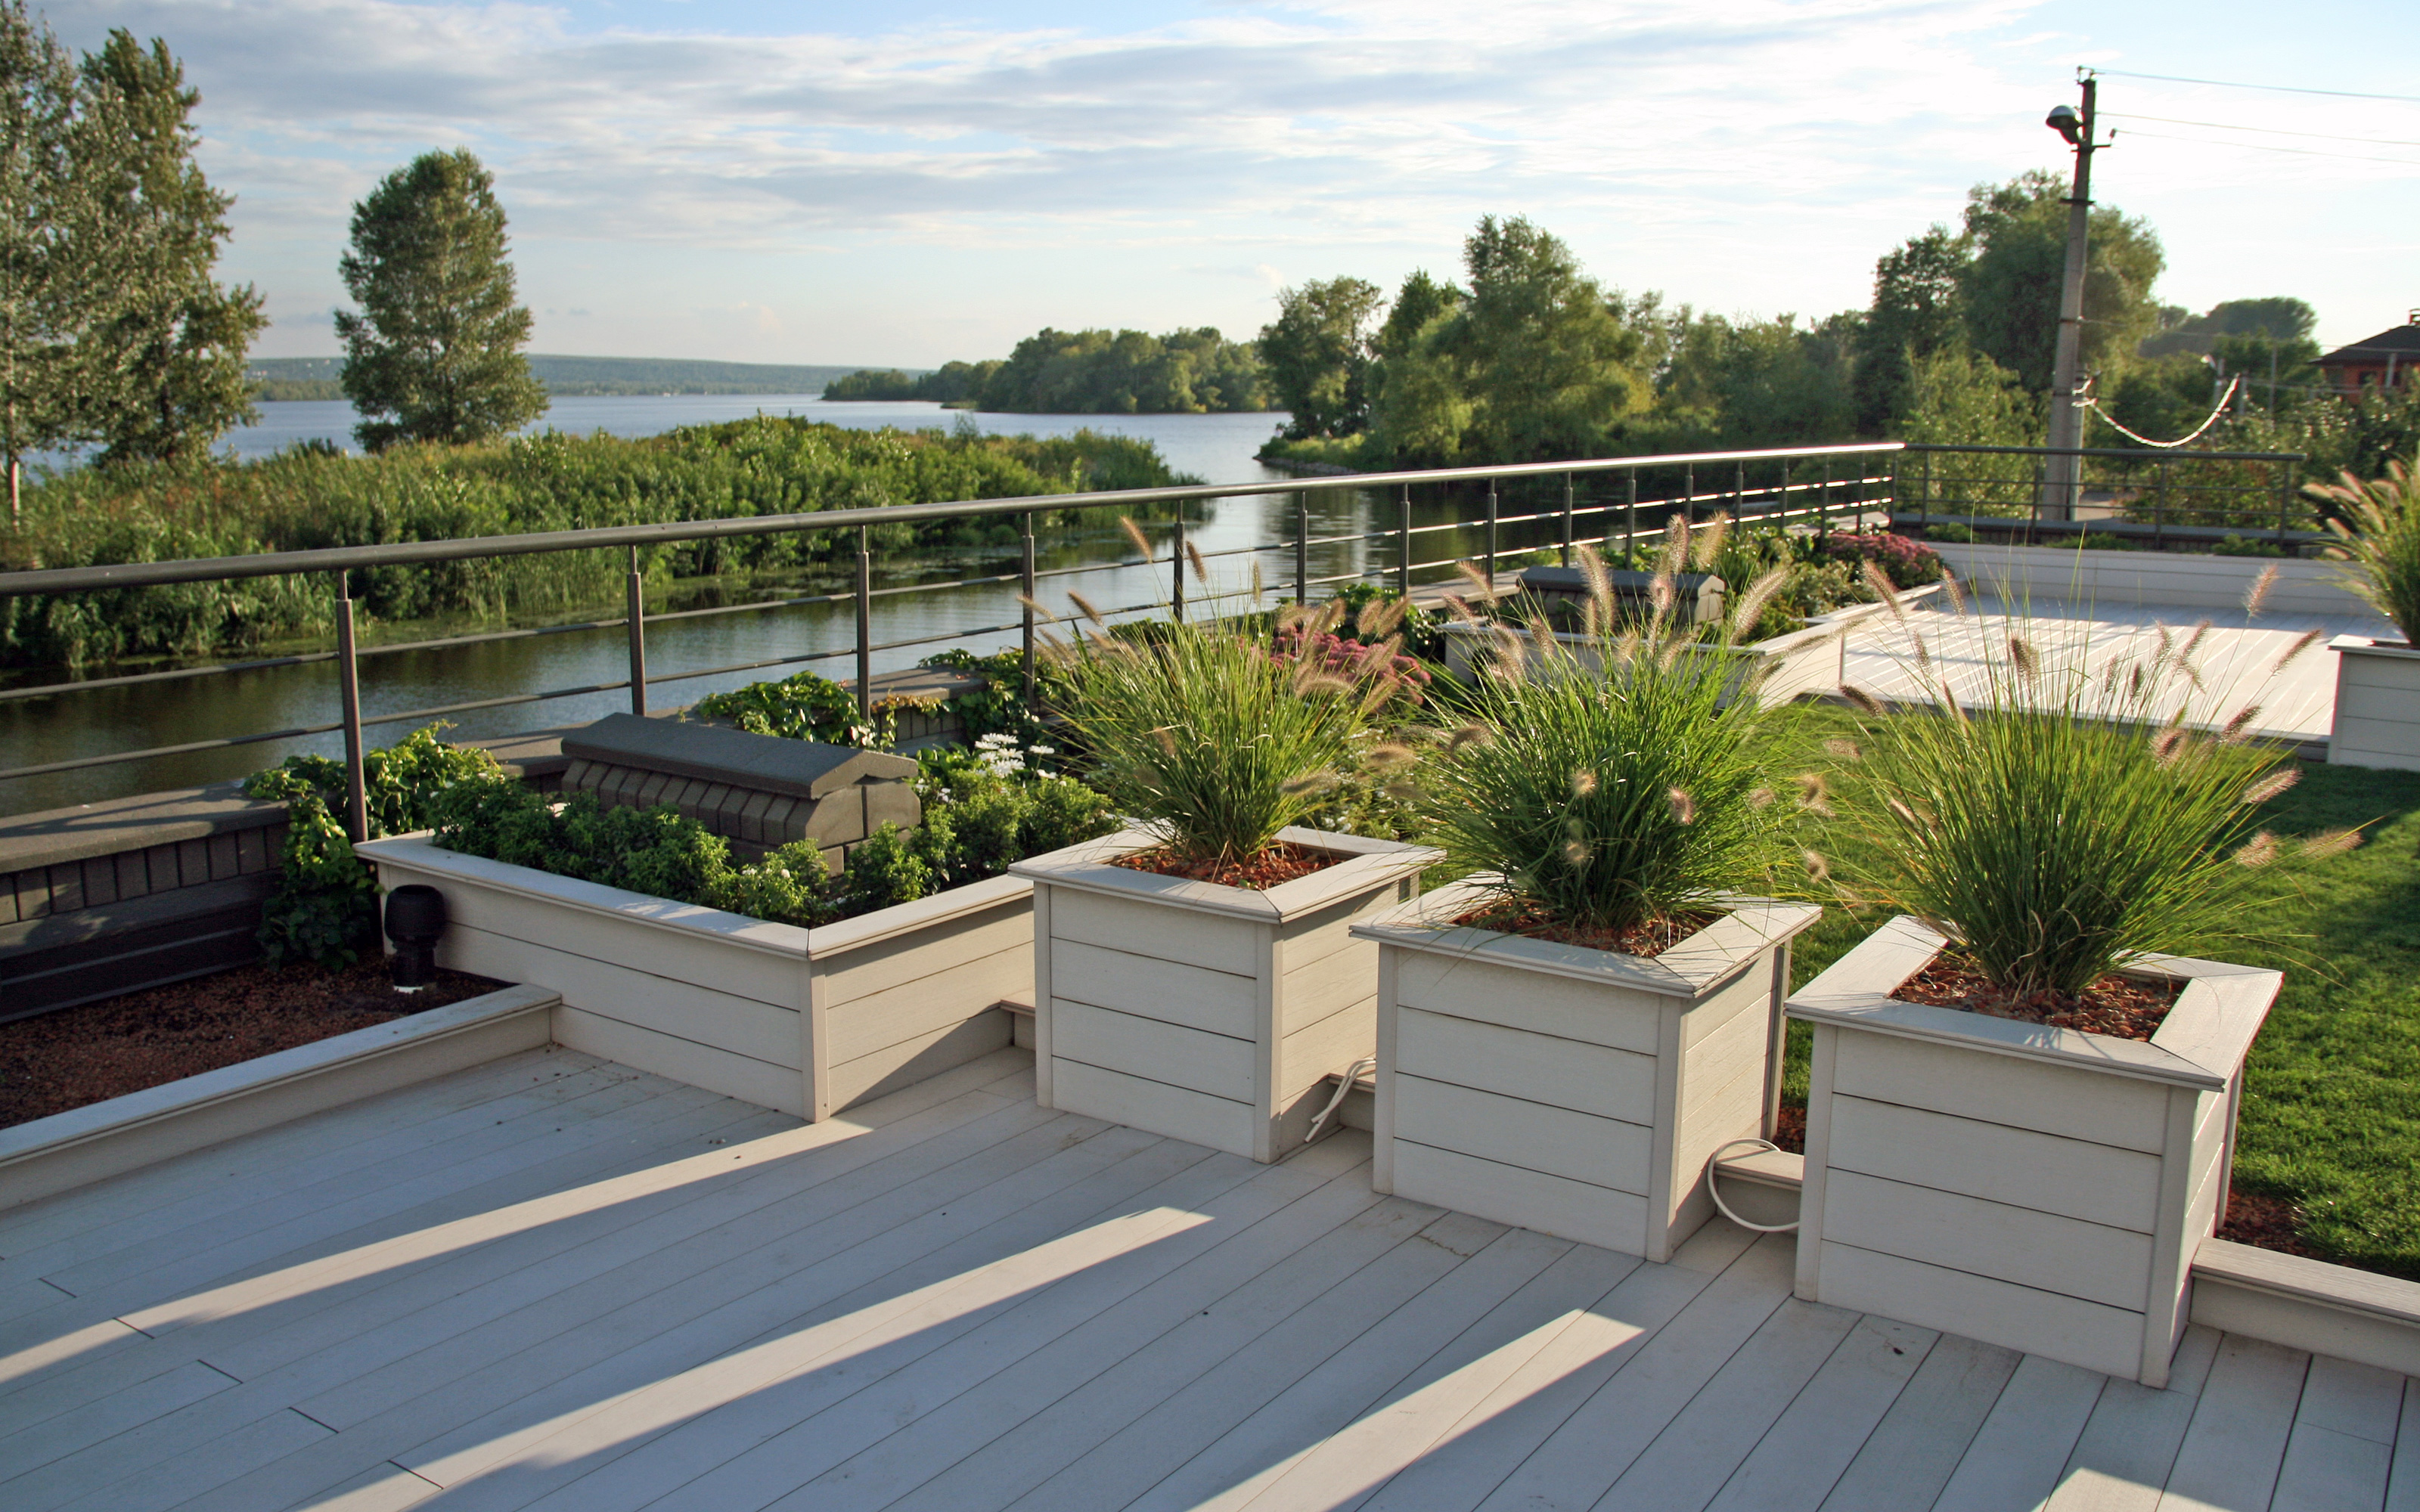 Roof garden with lawn, planters and wooden terrace decking